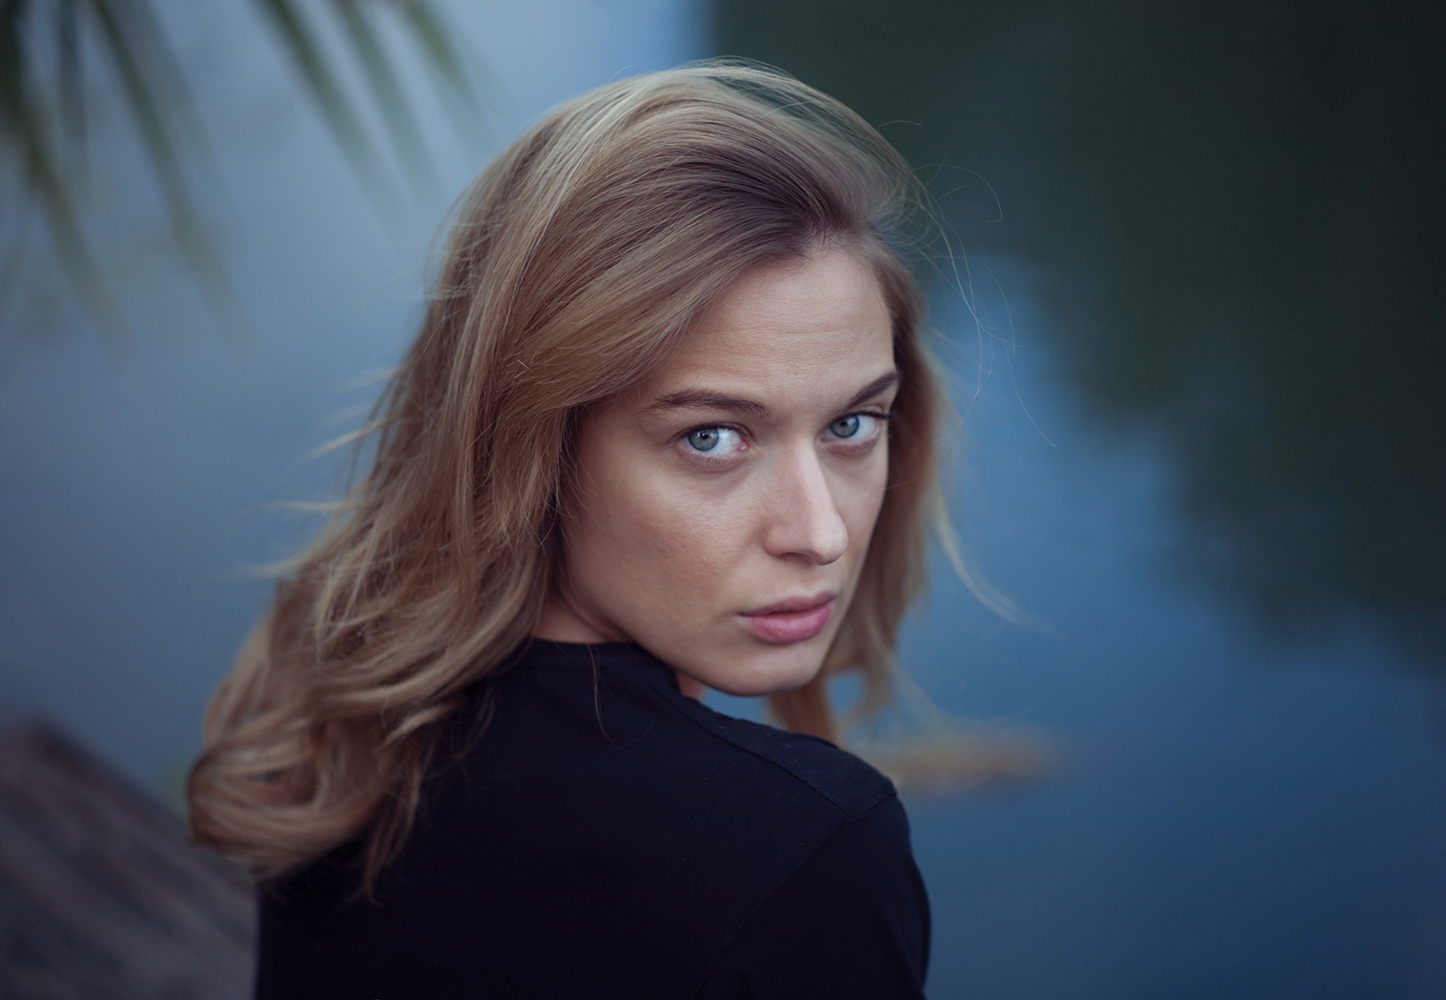 Feminine Portraiture with Fuji – The search for the optimum tool